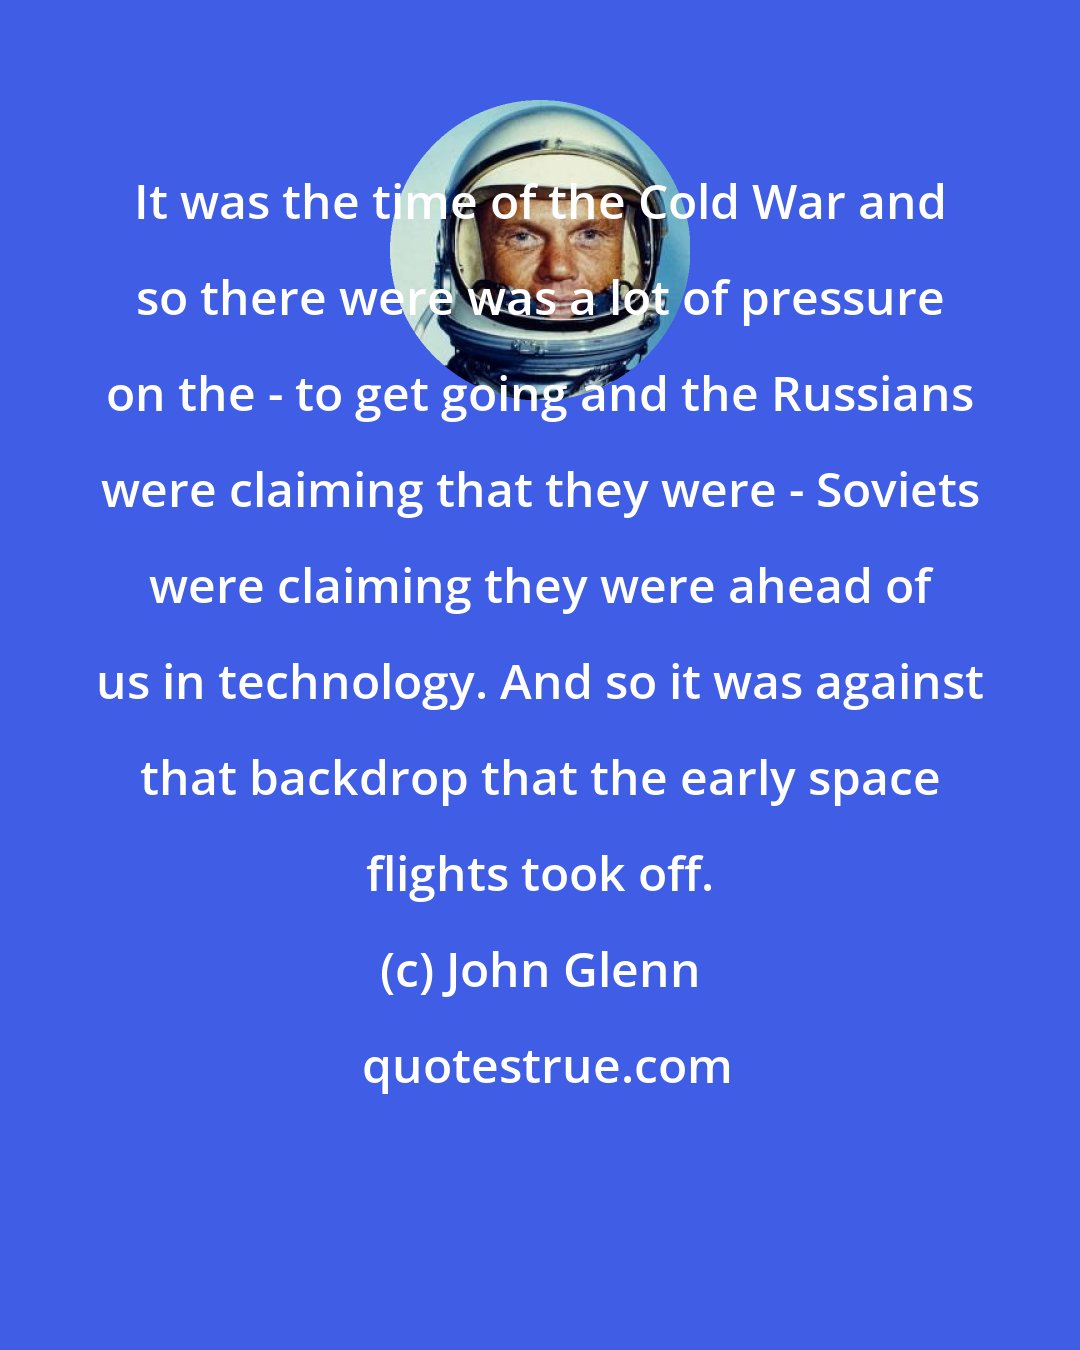 John Glenn: It was the time of the Cold War and so there were was a lot of pressure on the - to get going and the Russians were claiming that they were - Soviets were claiming they were ahead of us in technology. And so it was against that backdrop that the early space flights took off.